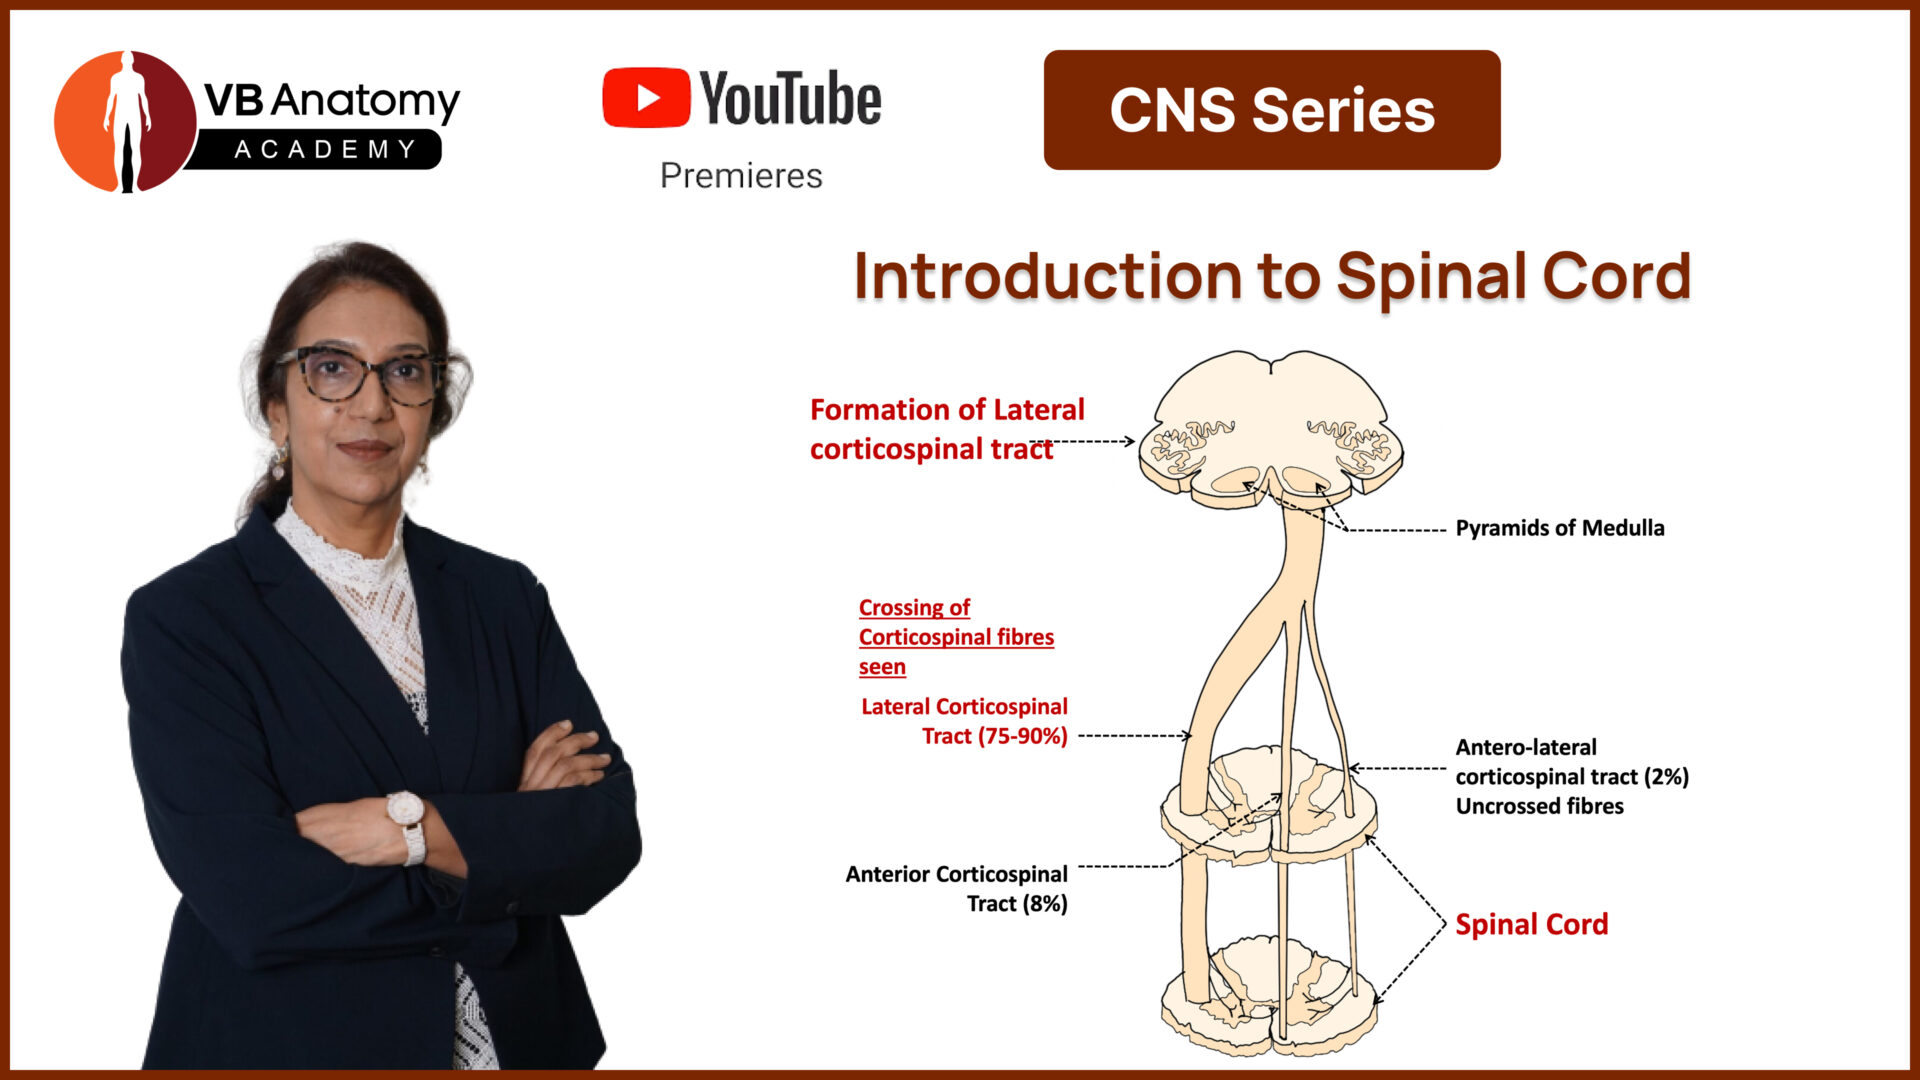 Introduction to spinal cord